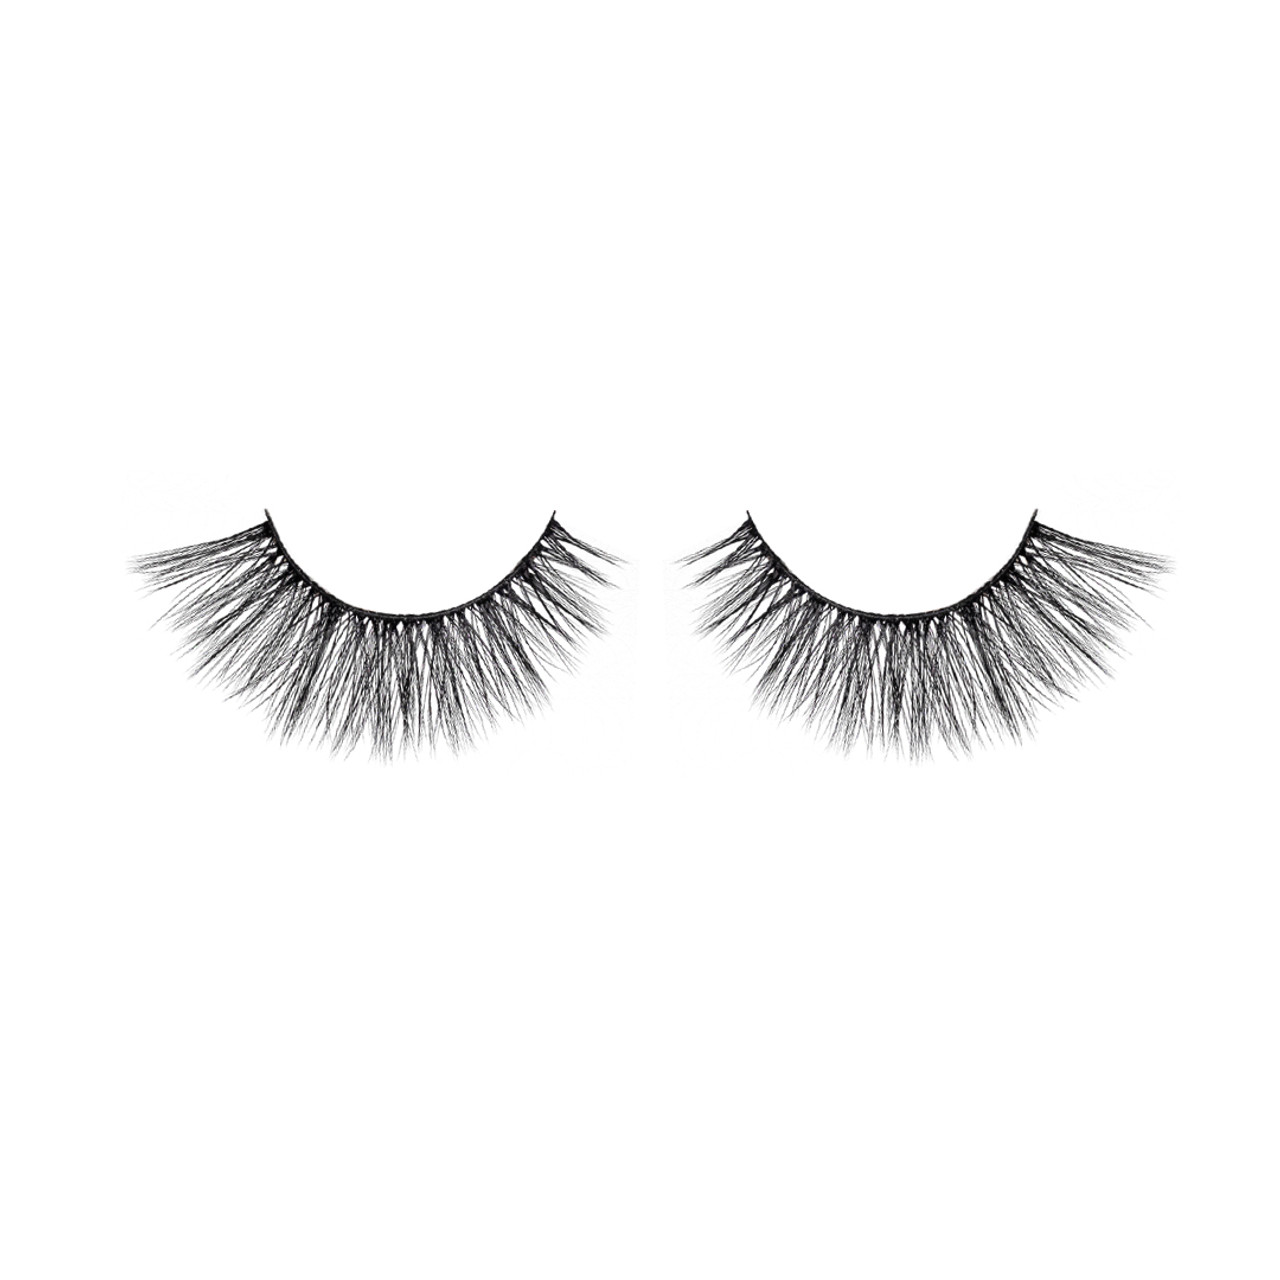 J-Lash - Lacey Luxe Lash Blooming